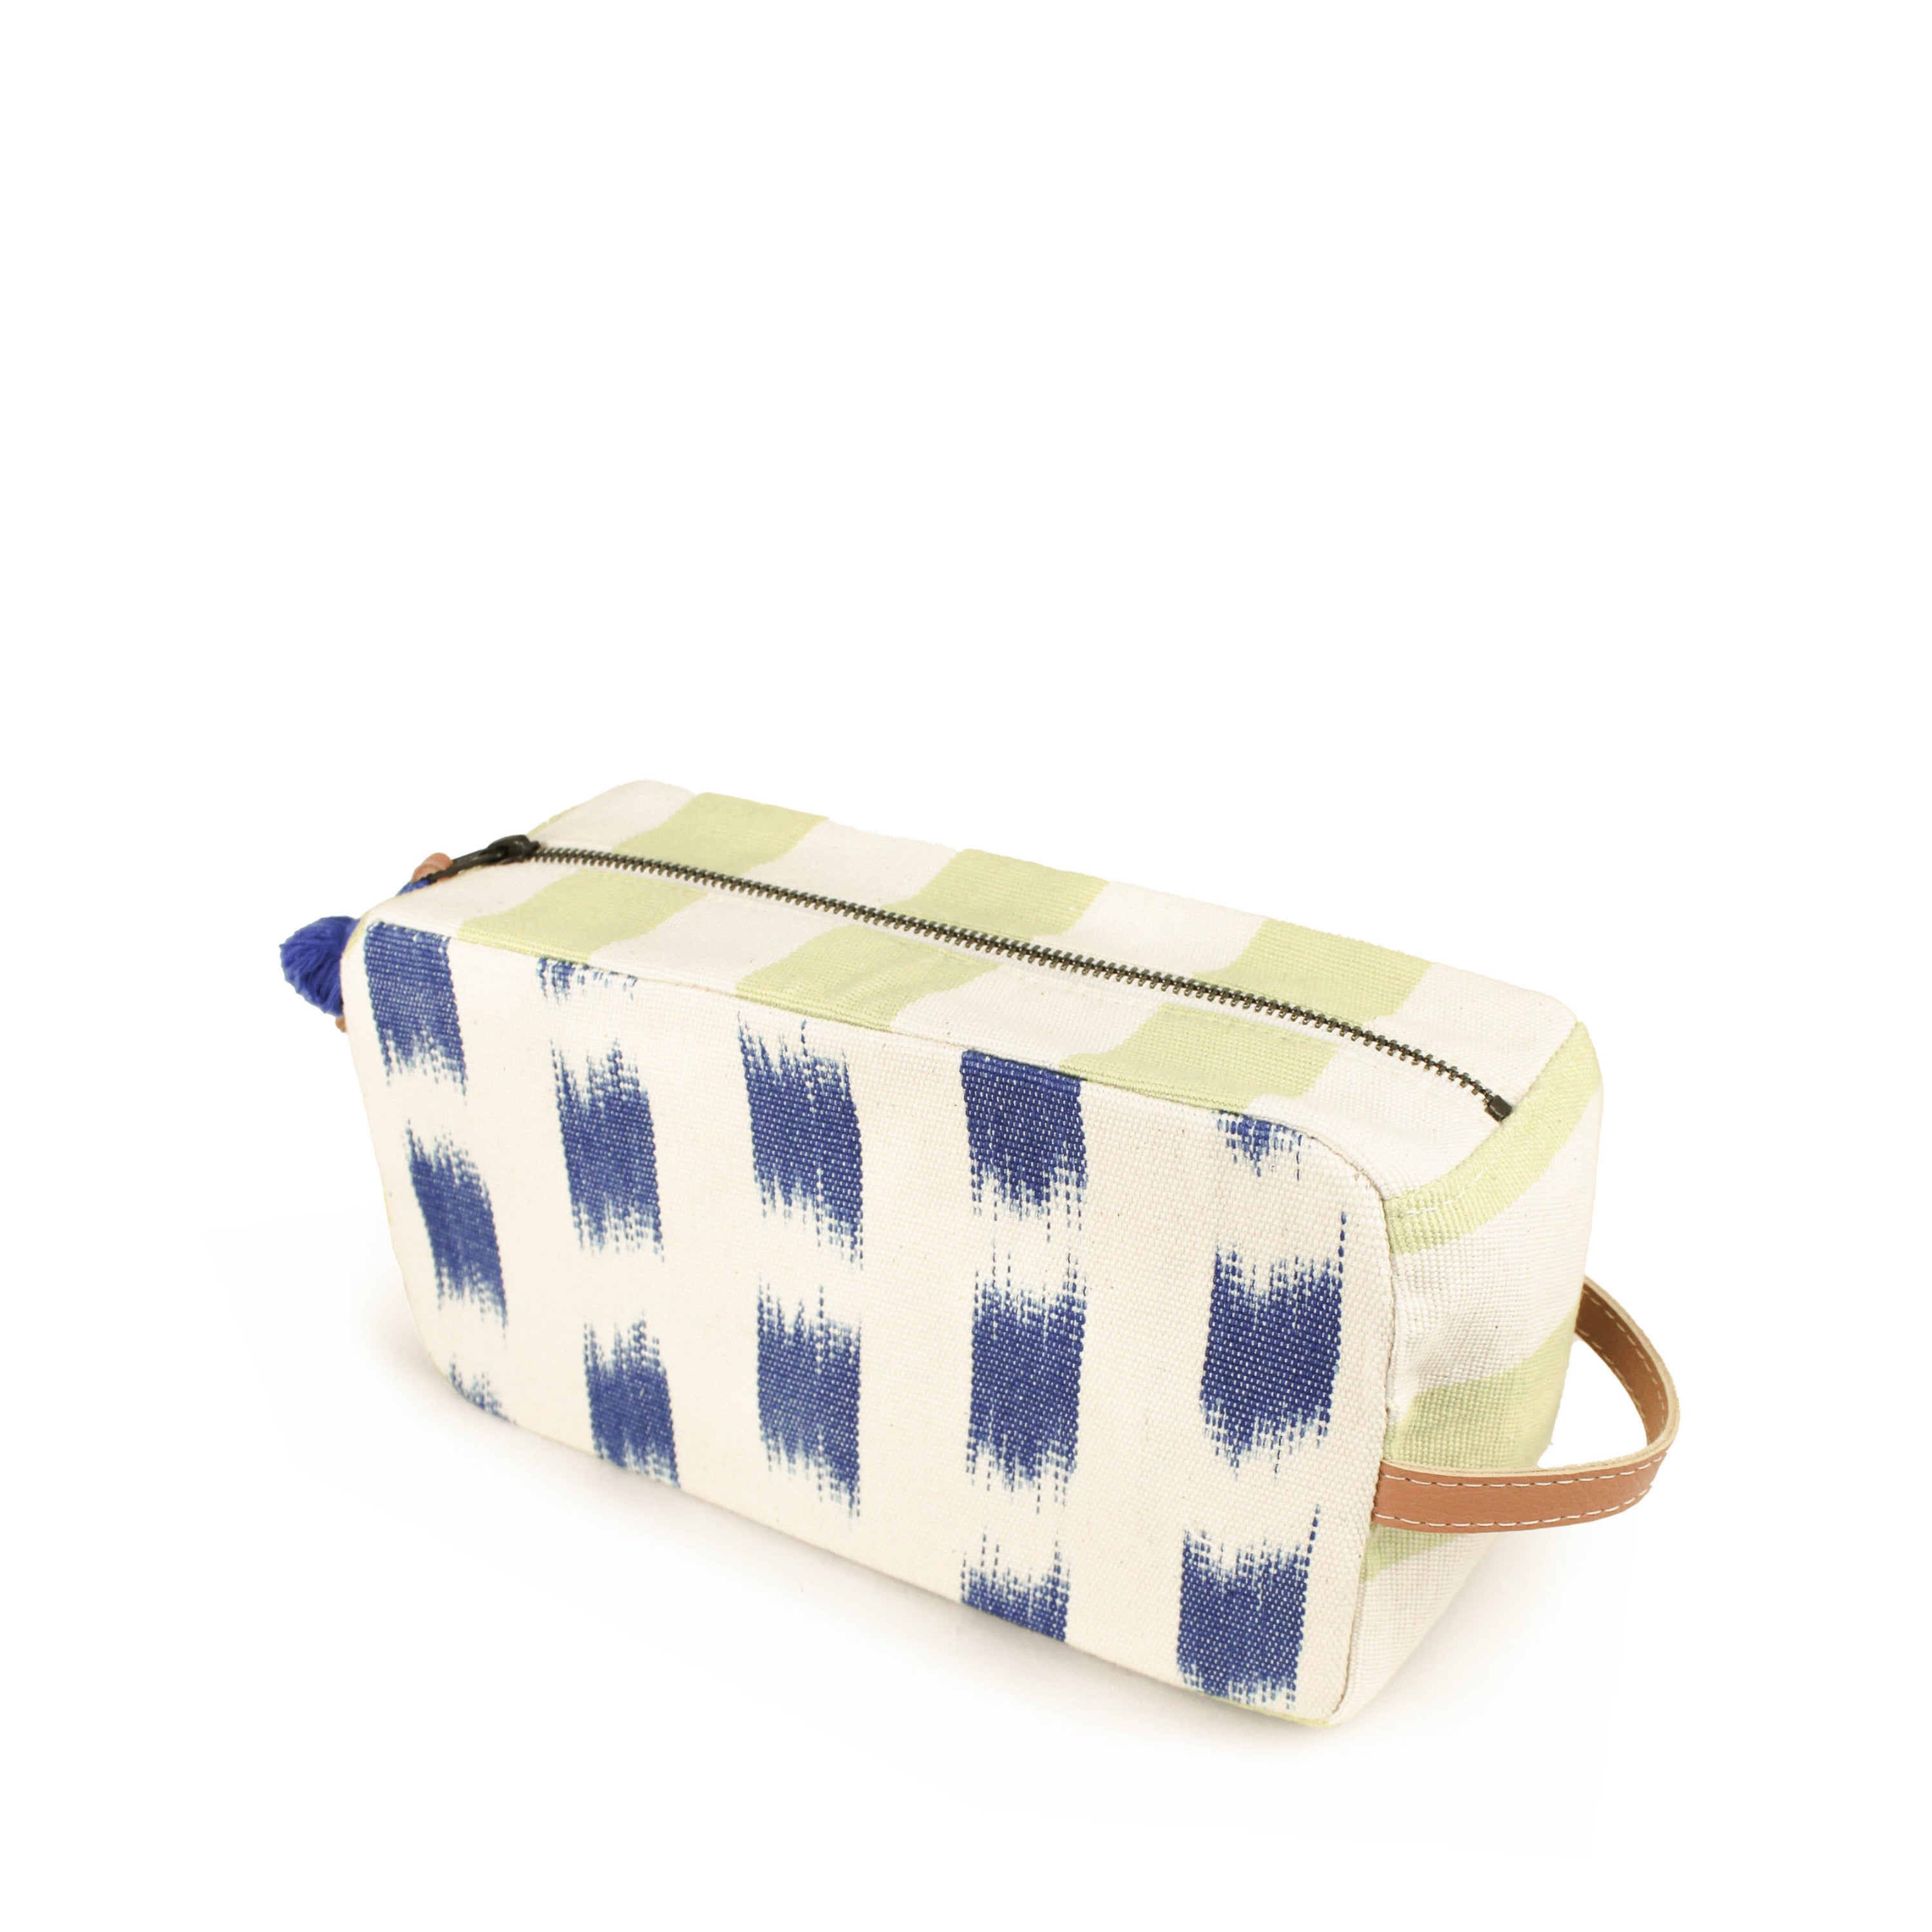 Right-sided angle view of the hand woven artisan Edna Dopp Kit in Brushstrokes pattern.